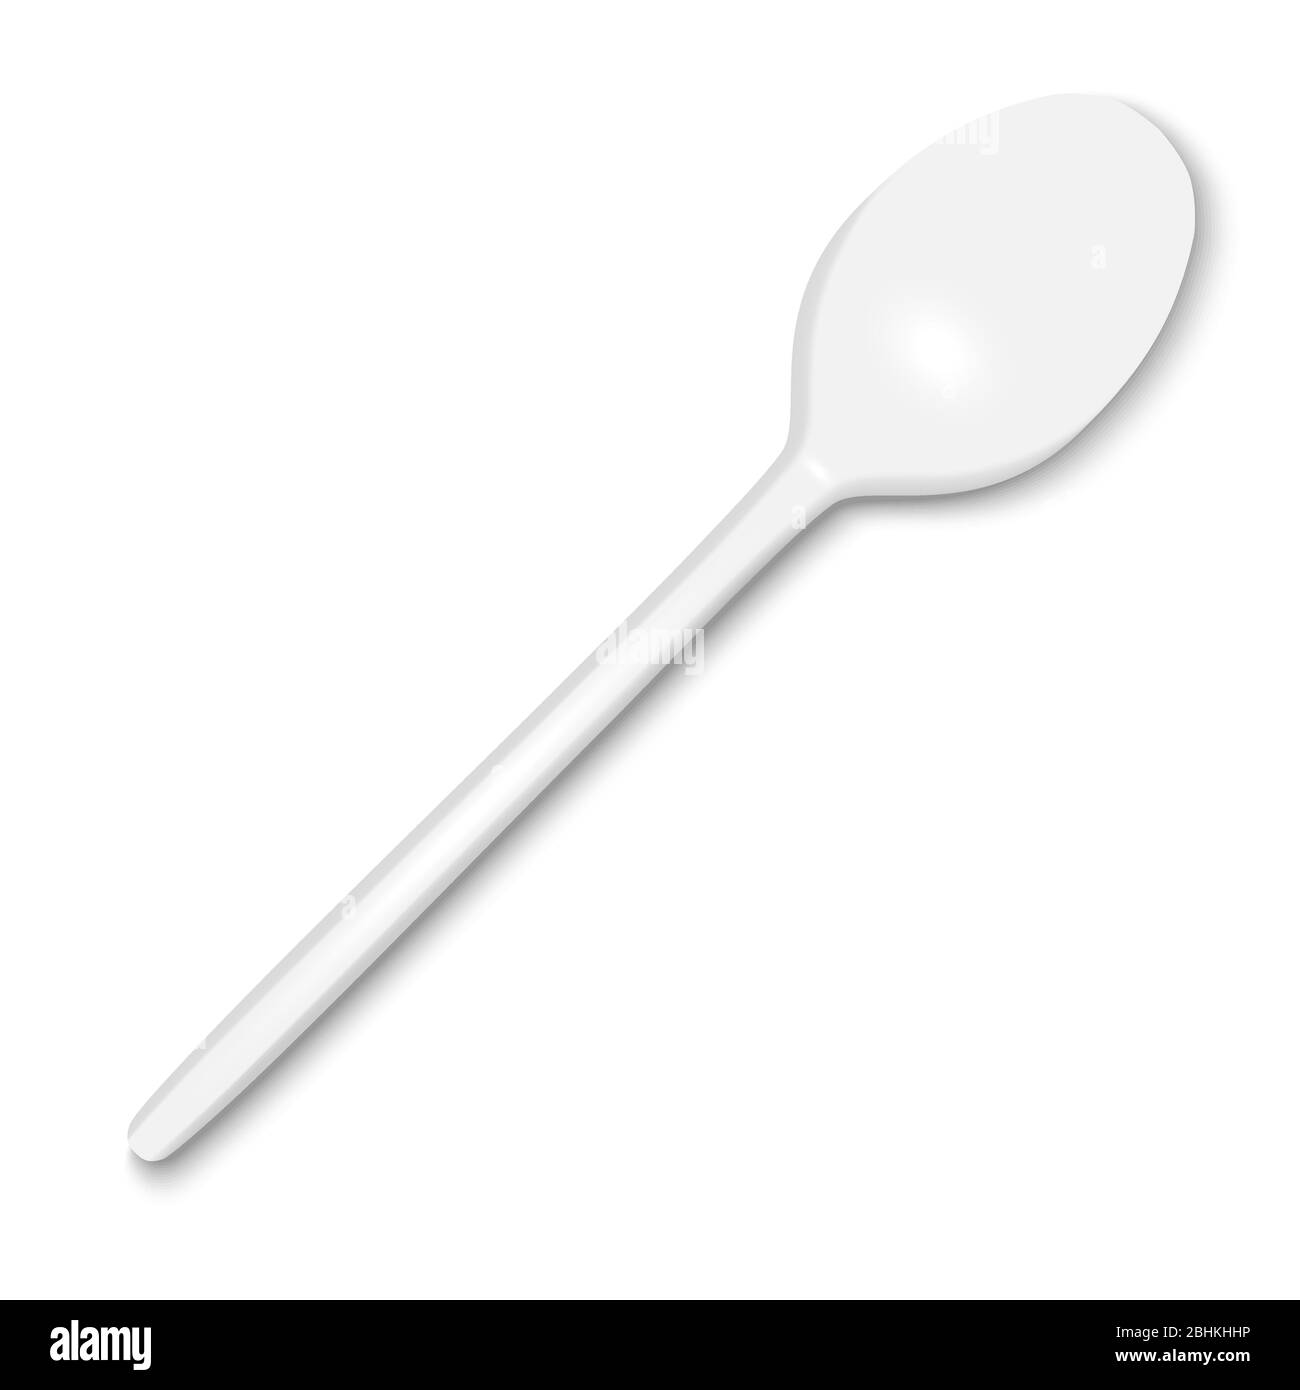 https://c8.alamy.com/comp/2BHKHHP/vector-3d-realistic-cutlery-white-plastic-disposable-spoon-icon-isolated-on-white-background-top-view-design-template-mock-up-for-graphics-2BHKHHP.jpg